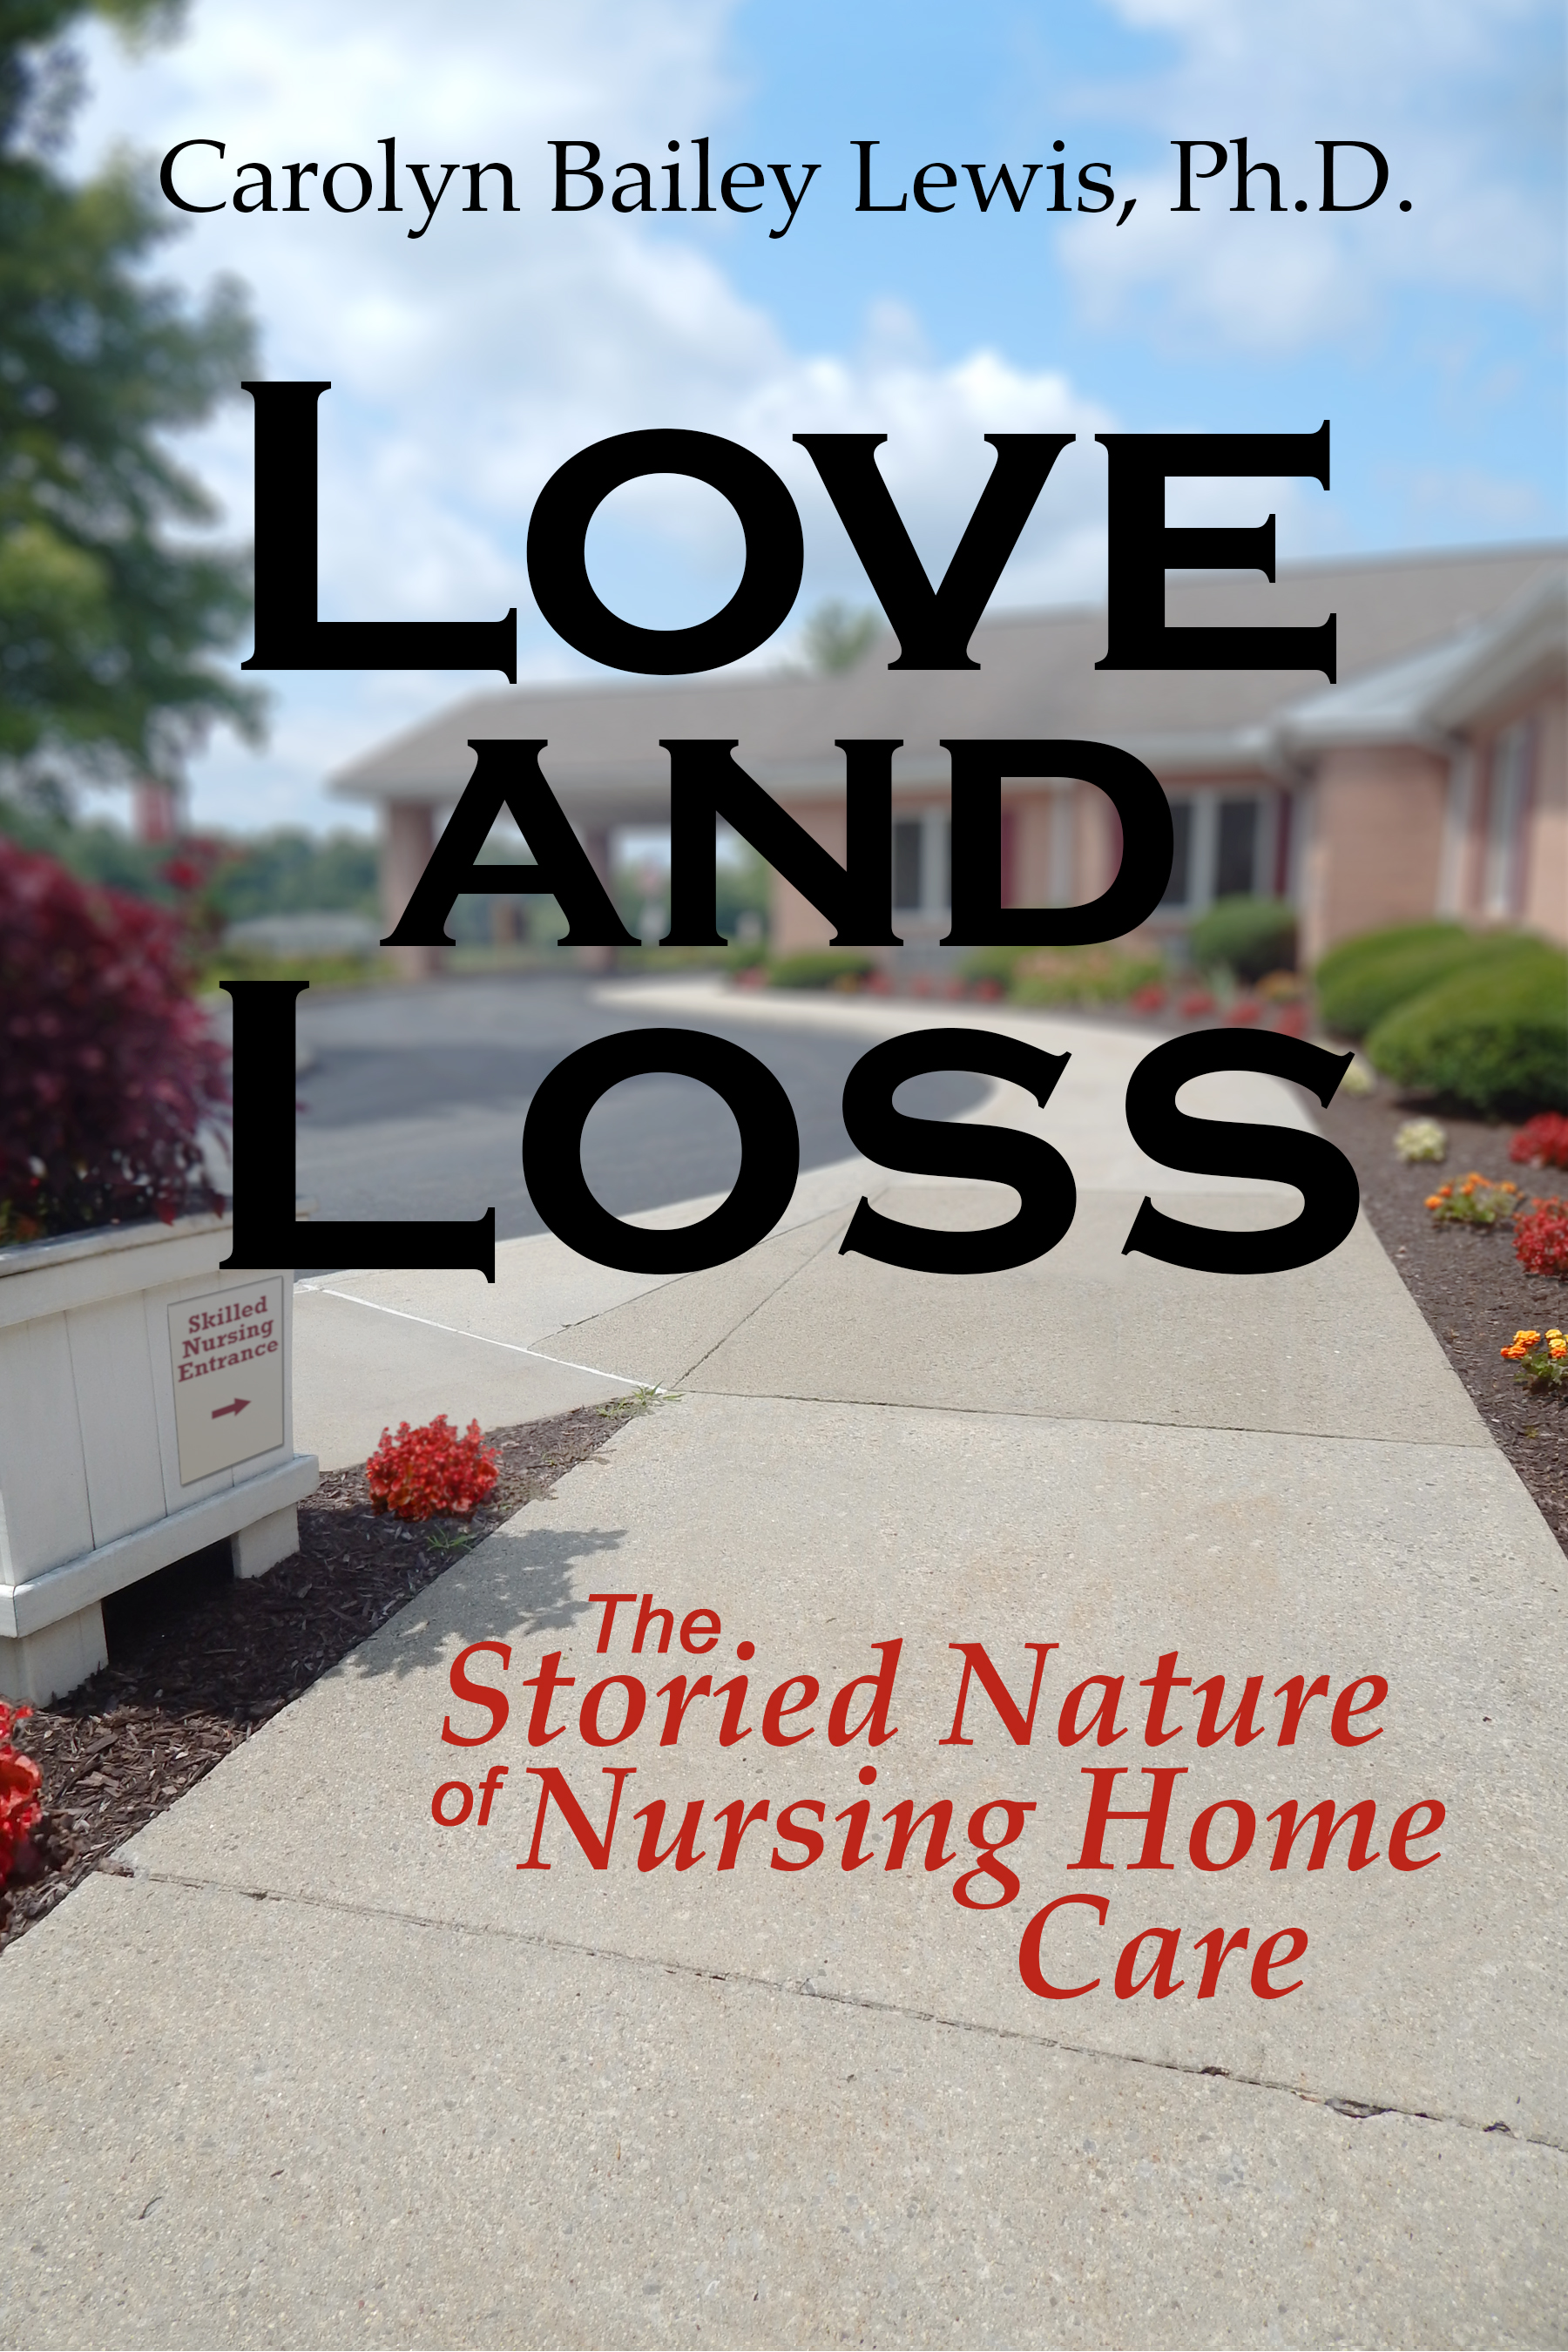 Image of cover of featured book by Carolyn Lewis.